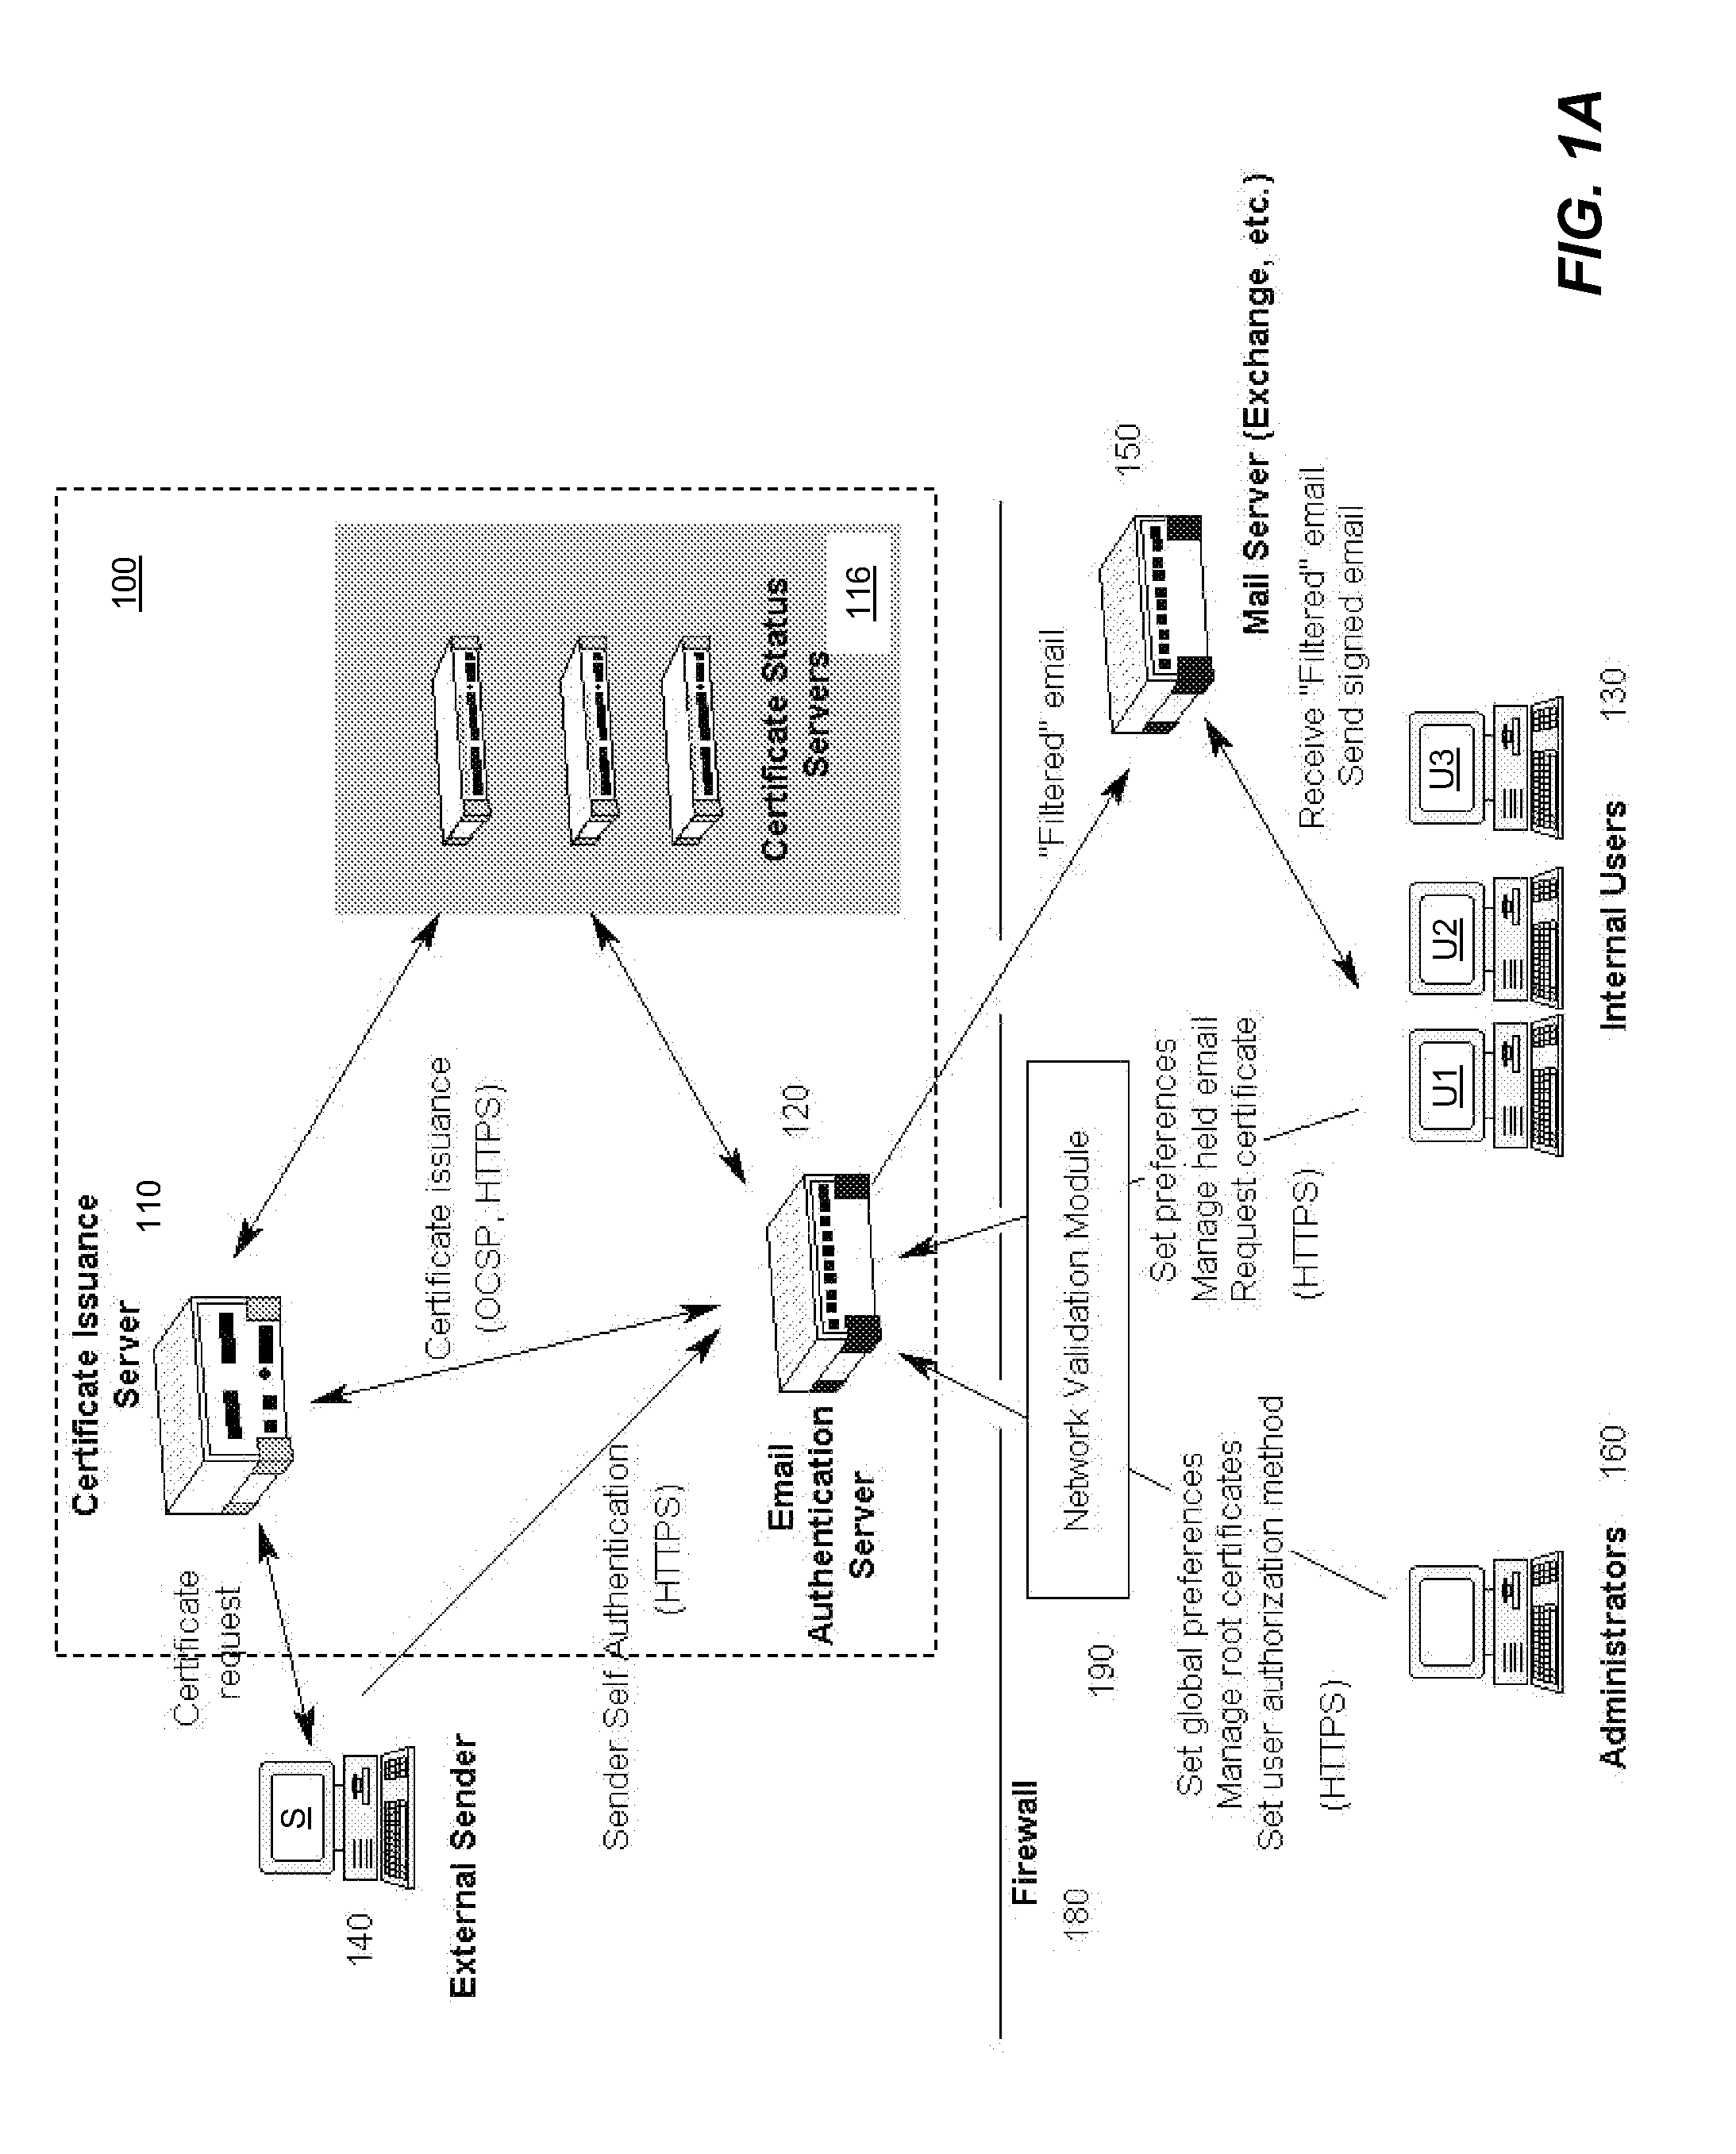 Anti-UCE system and method using class-based certificates